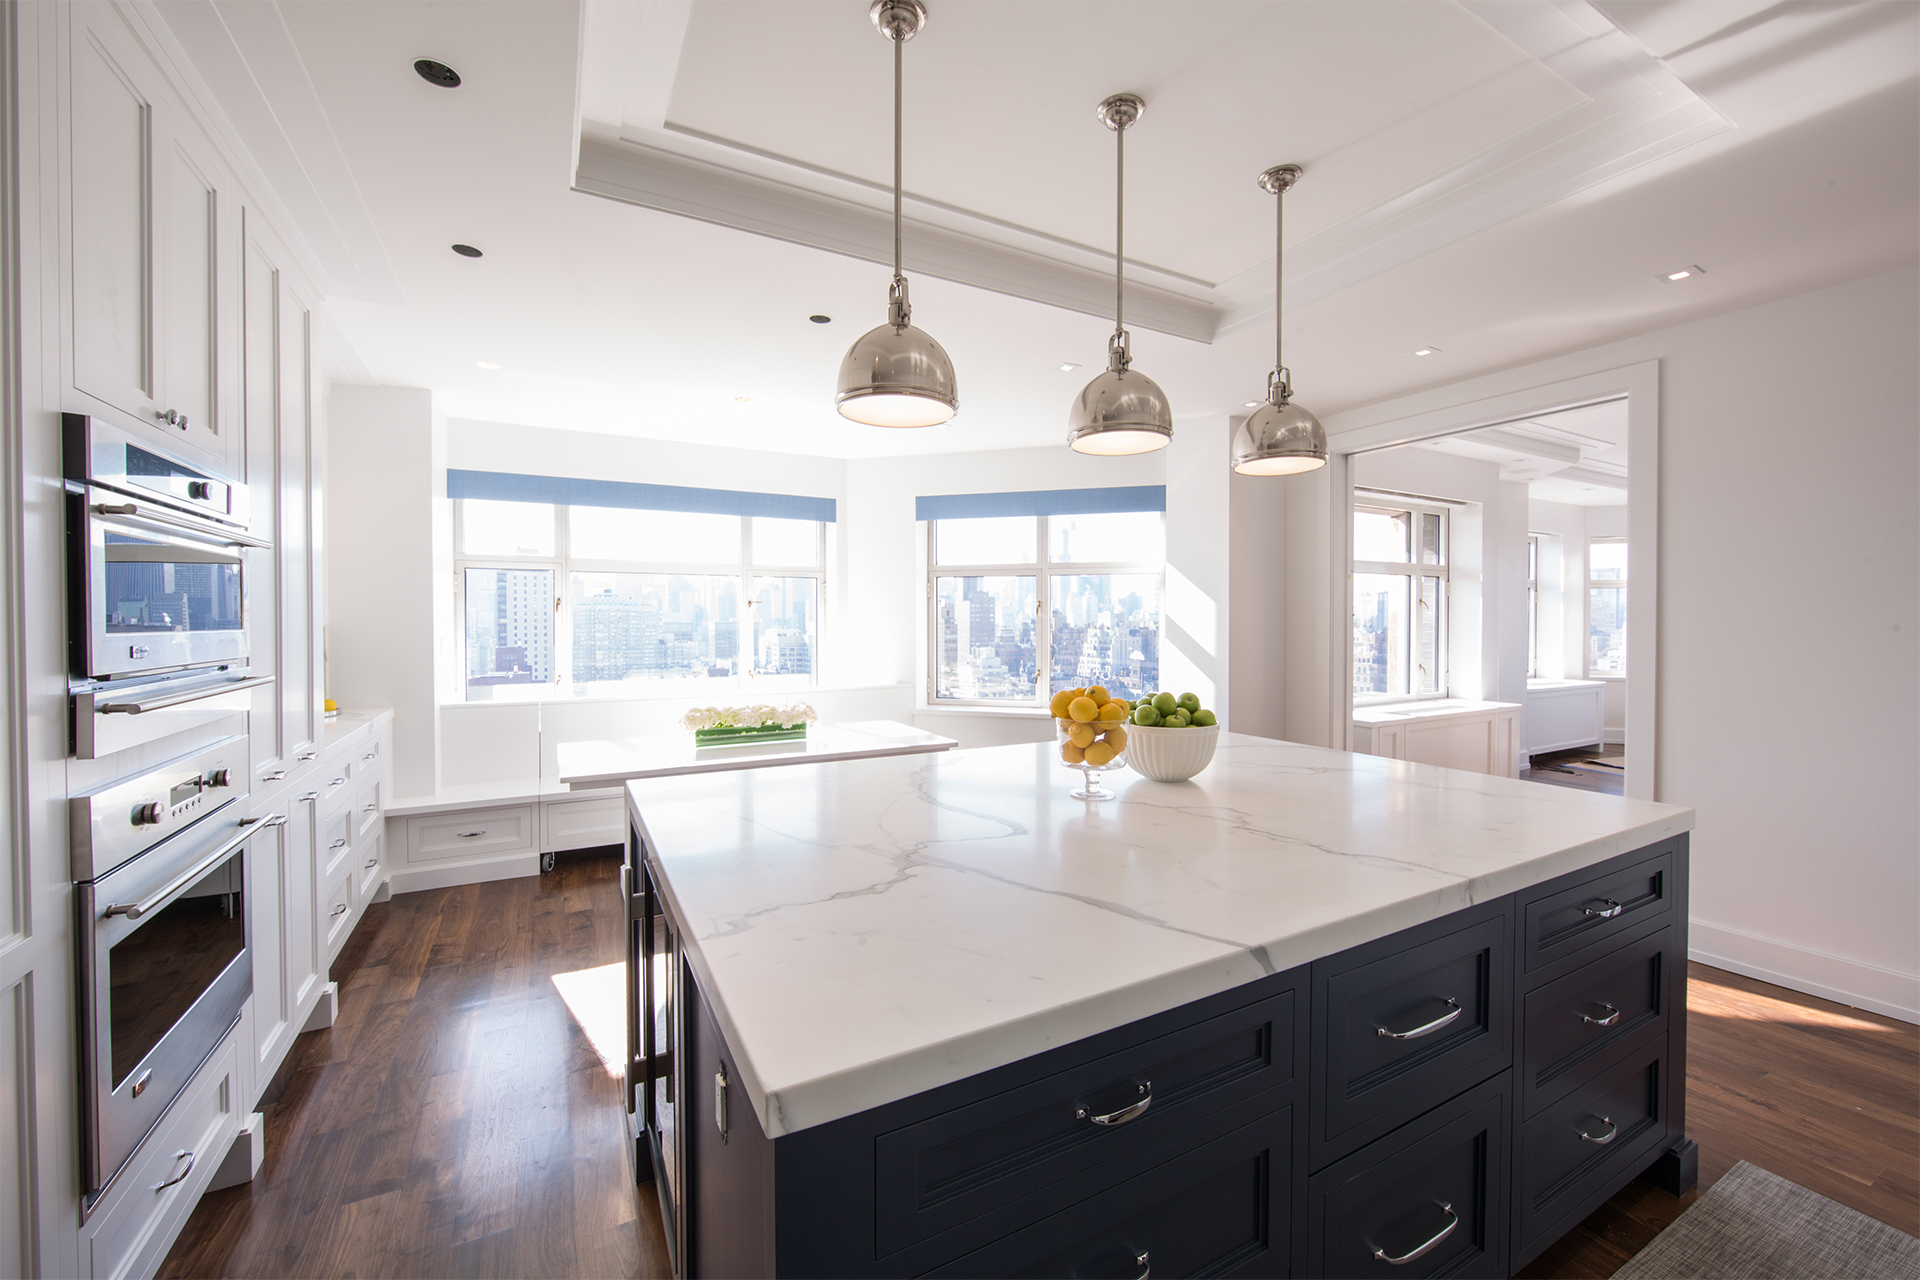 UES New York Residence - Kitchen Renovations 5